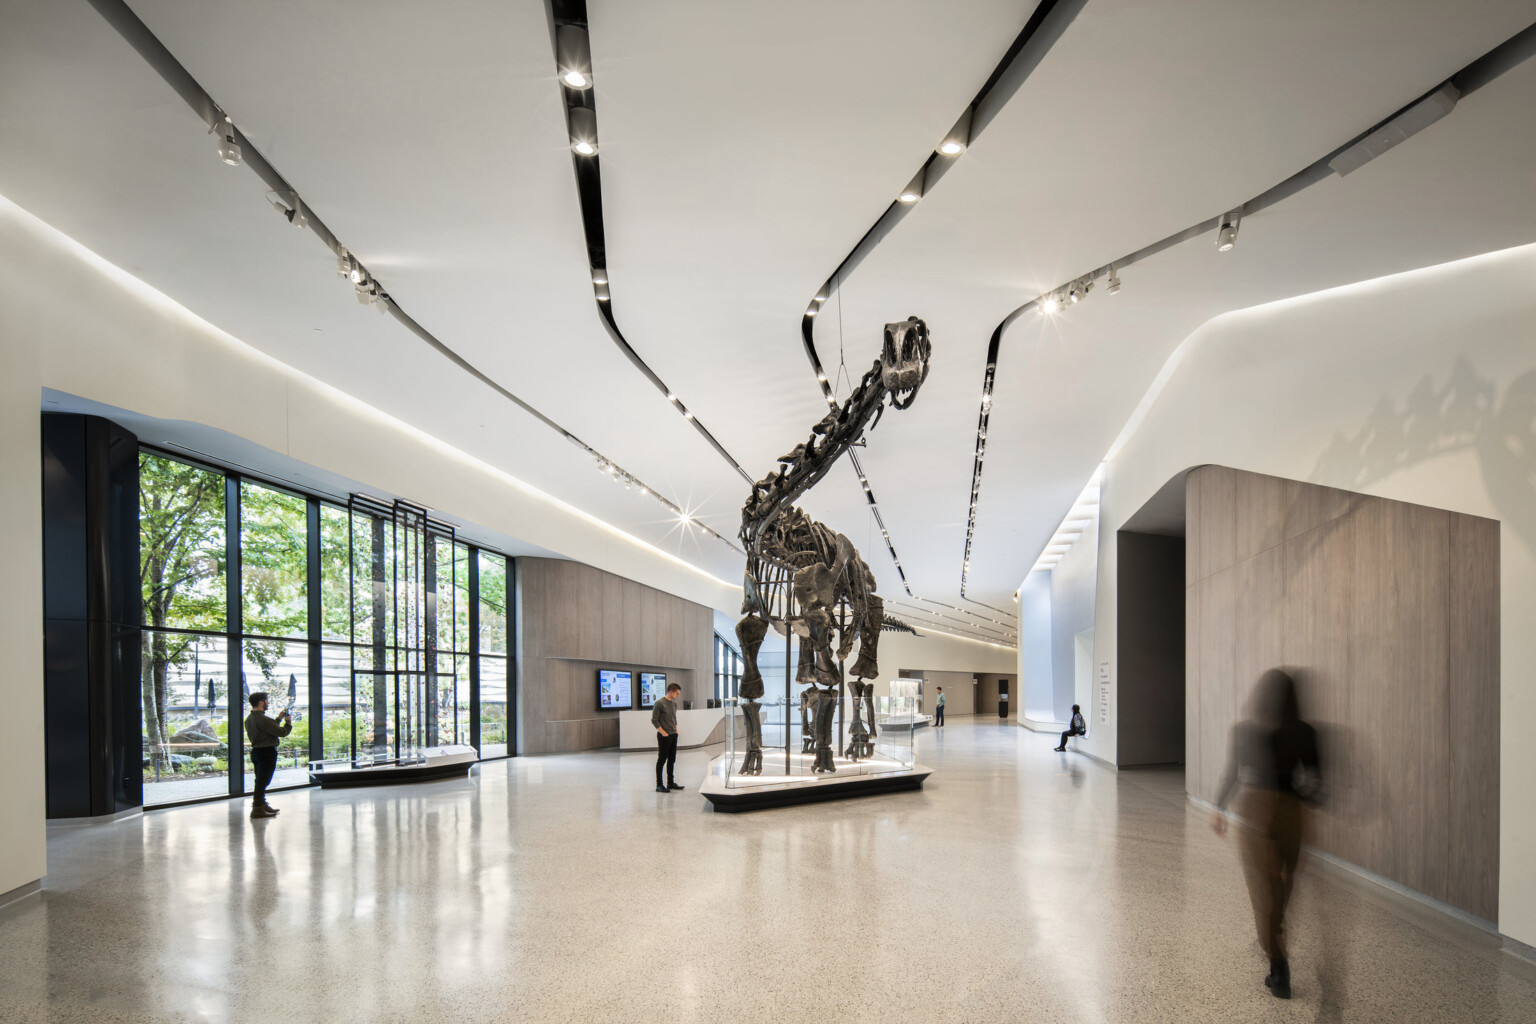 A dinosaur skeleton in an exhibition hall with people walking and viewing the exhibit in the large space with white walls, light tile flooring